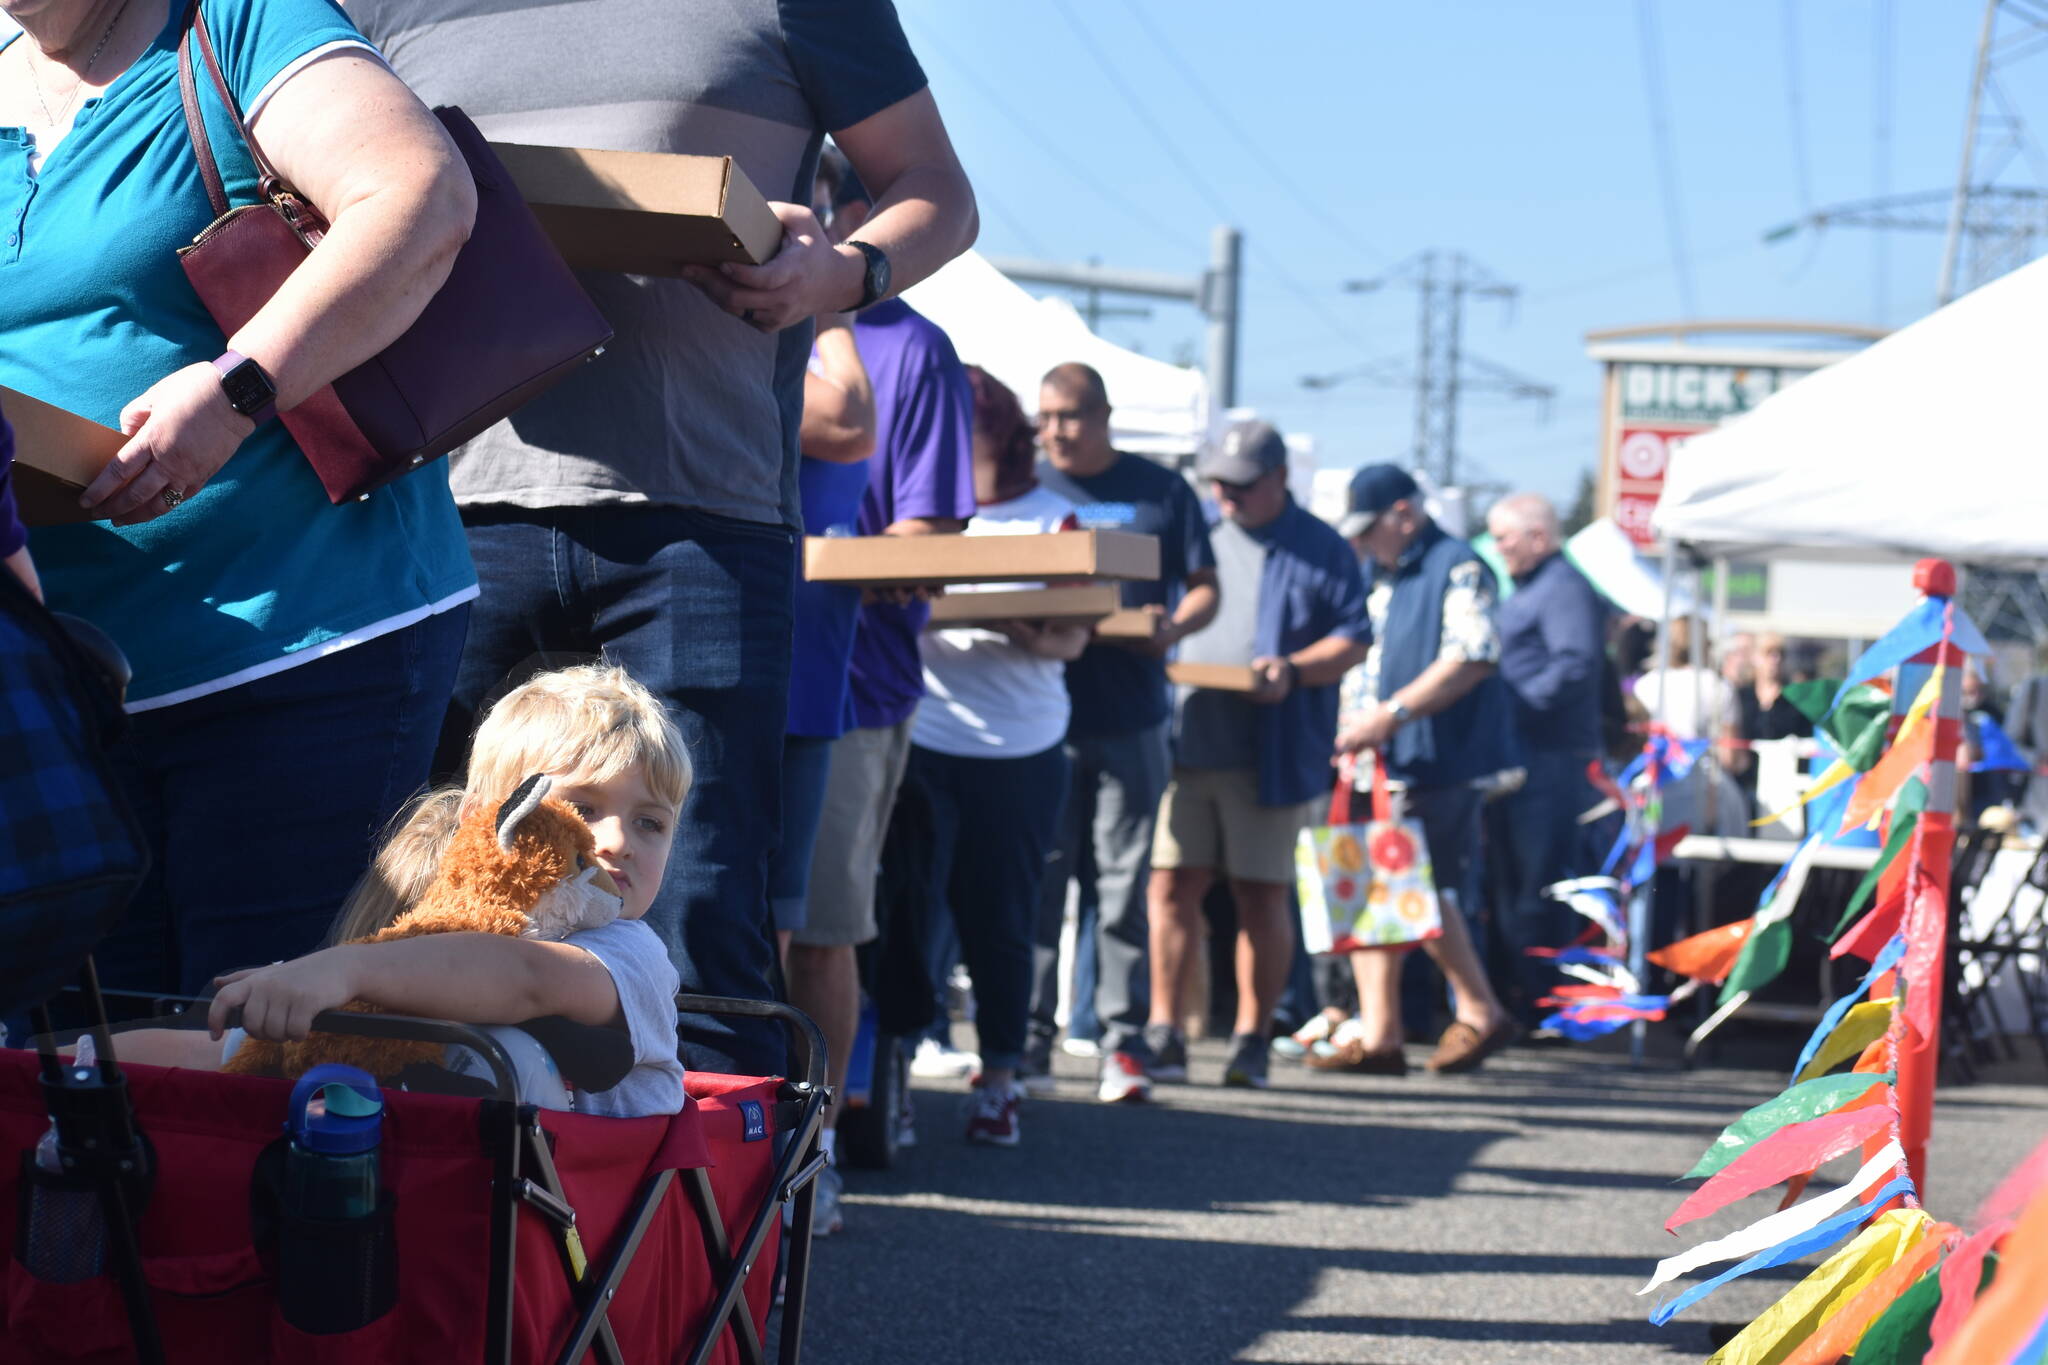 A kid shares a contemplative glance with their stuffed animal while the line makes its way through the restaurants at the Taste of Federal Way.